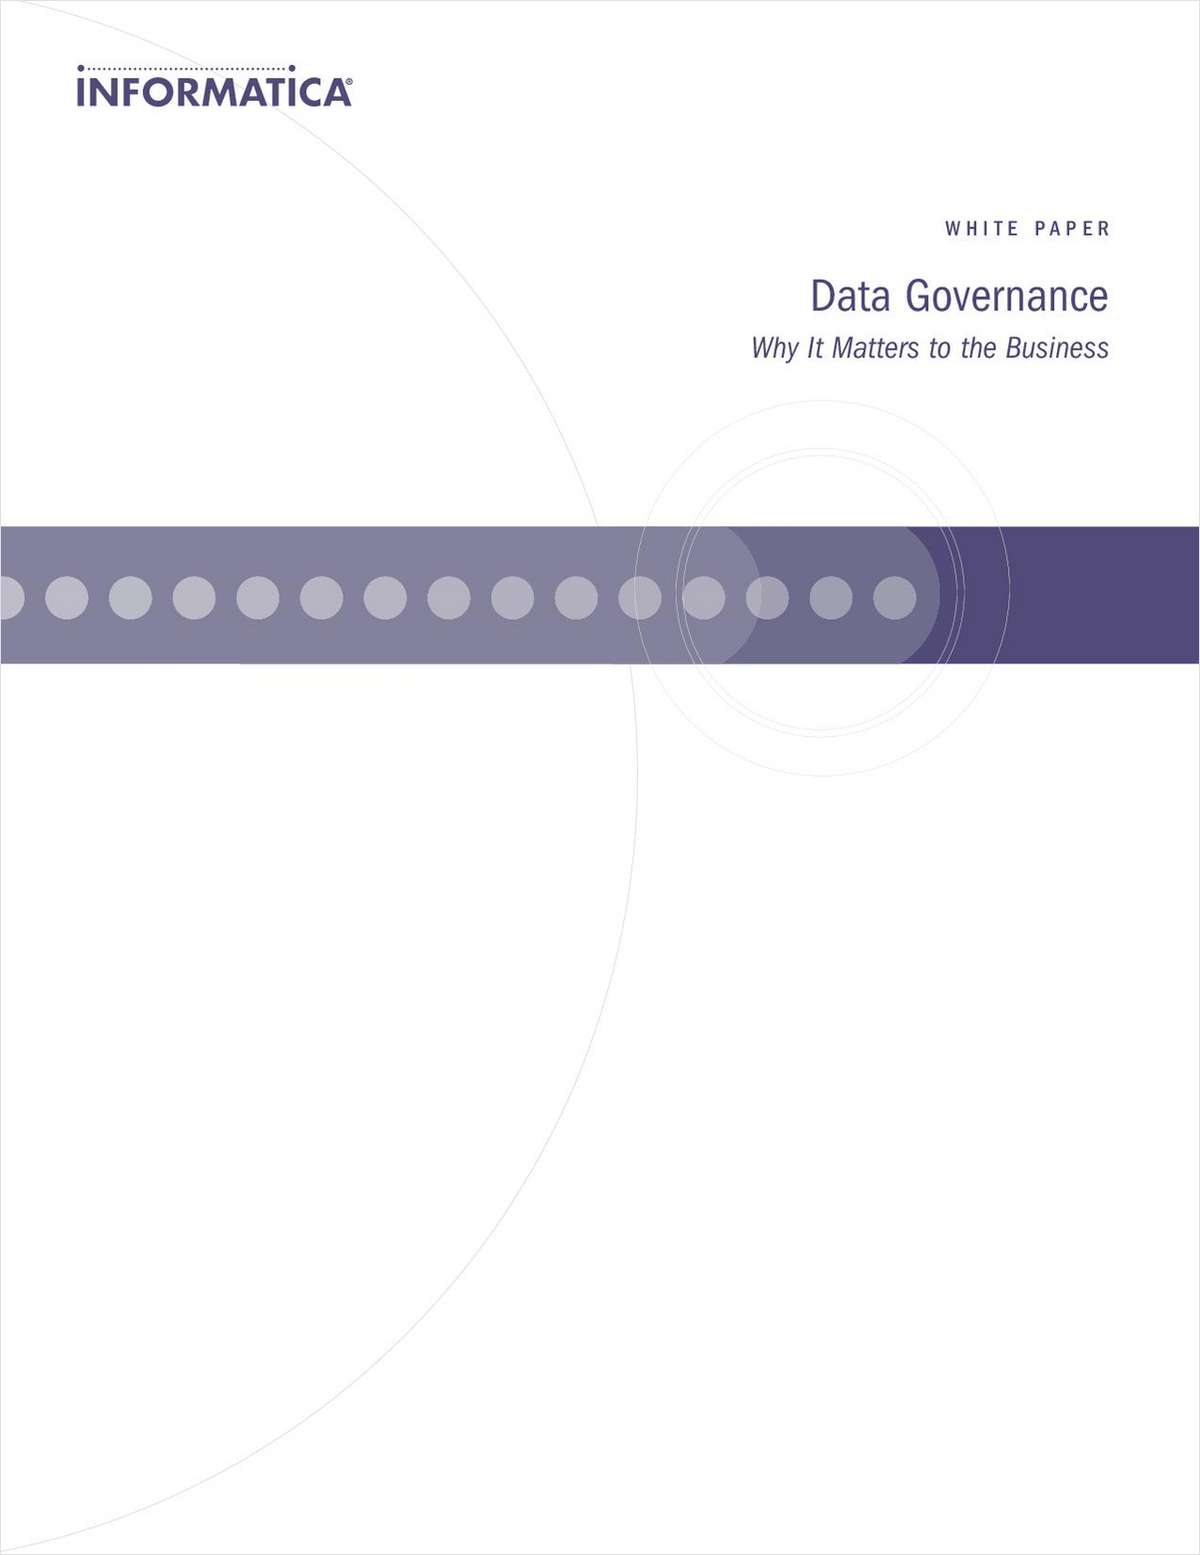 Data Governance, Why It Matters to the Business